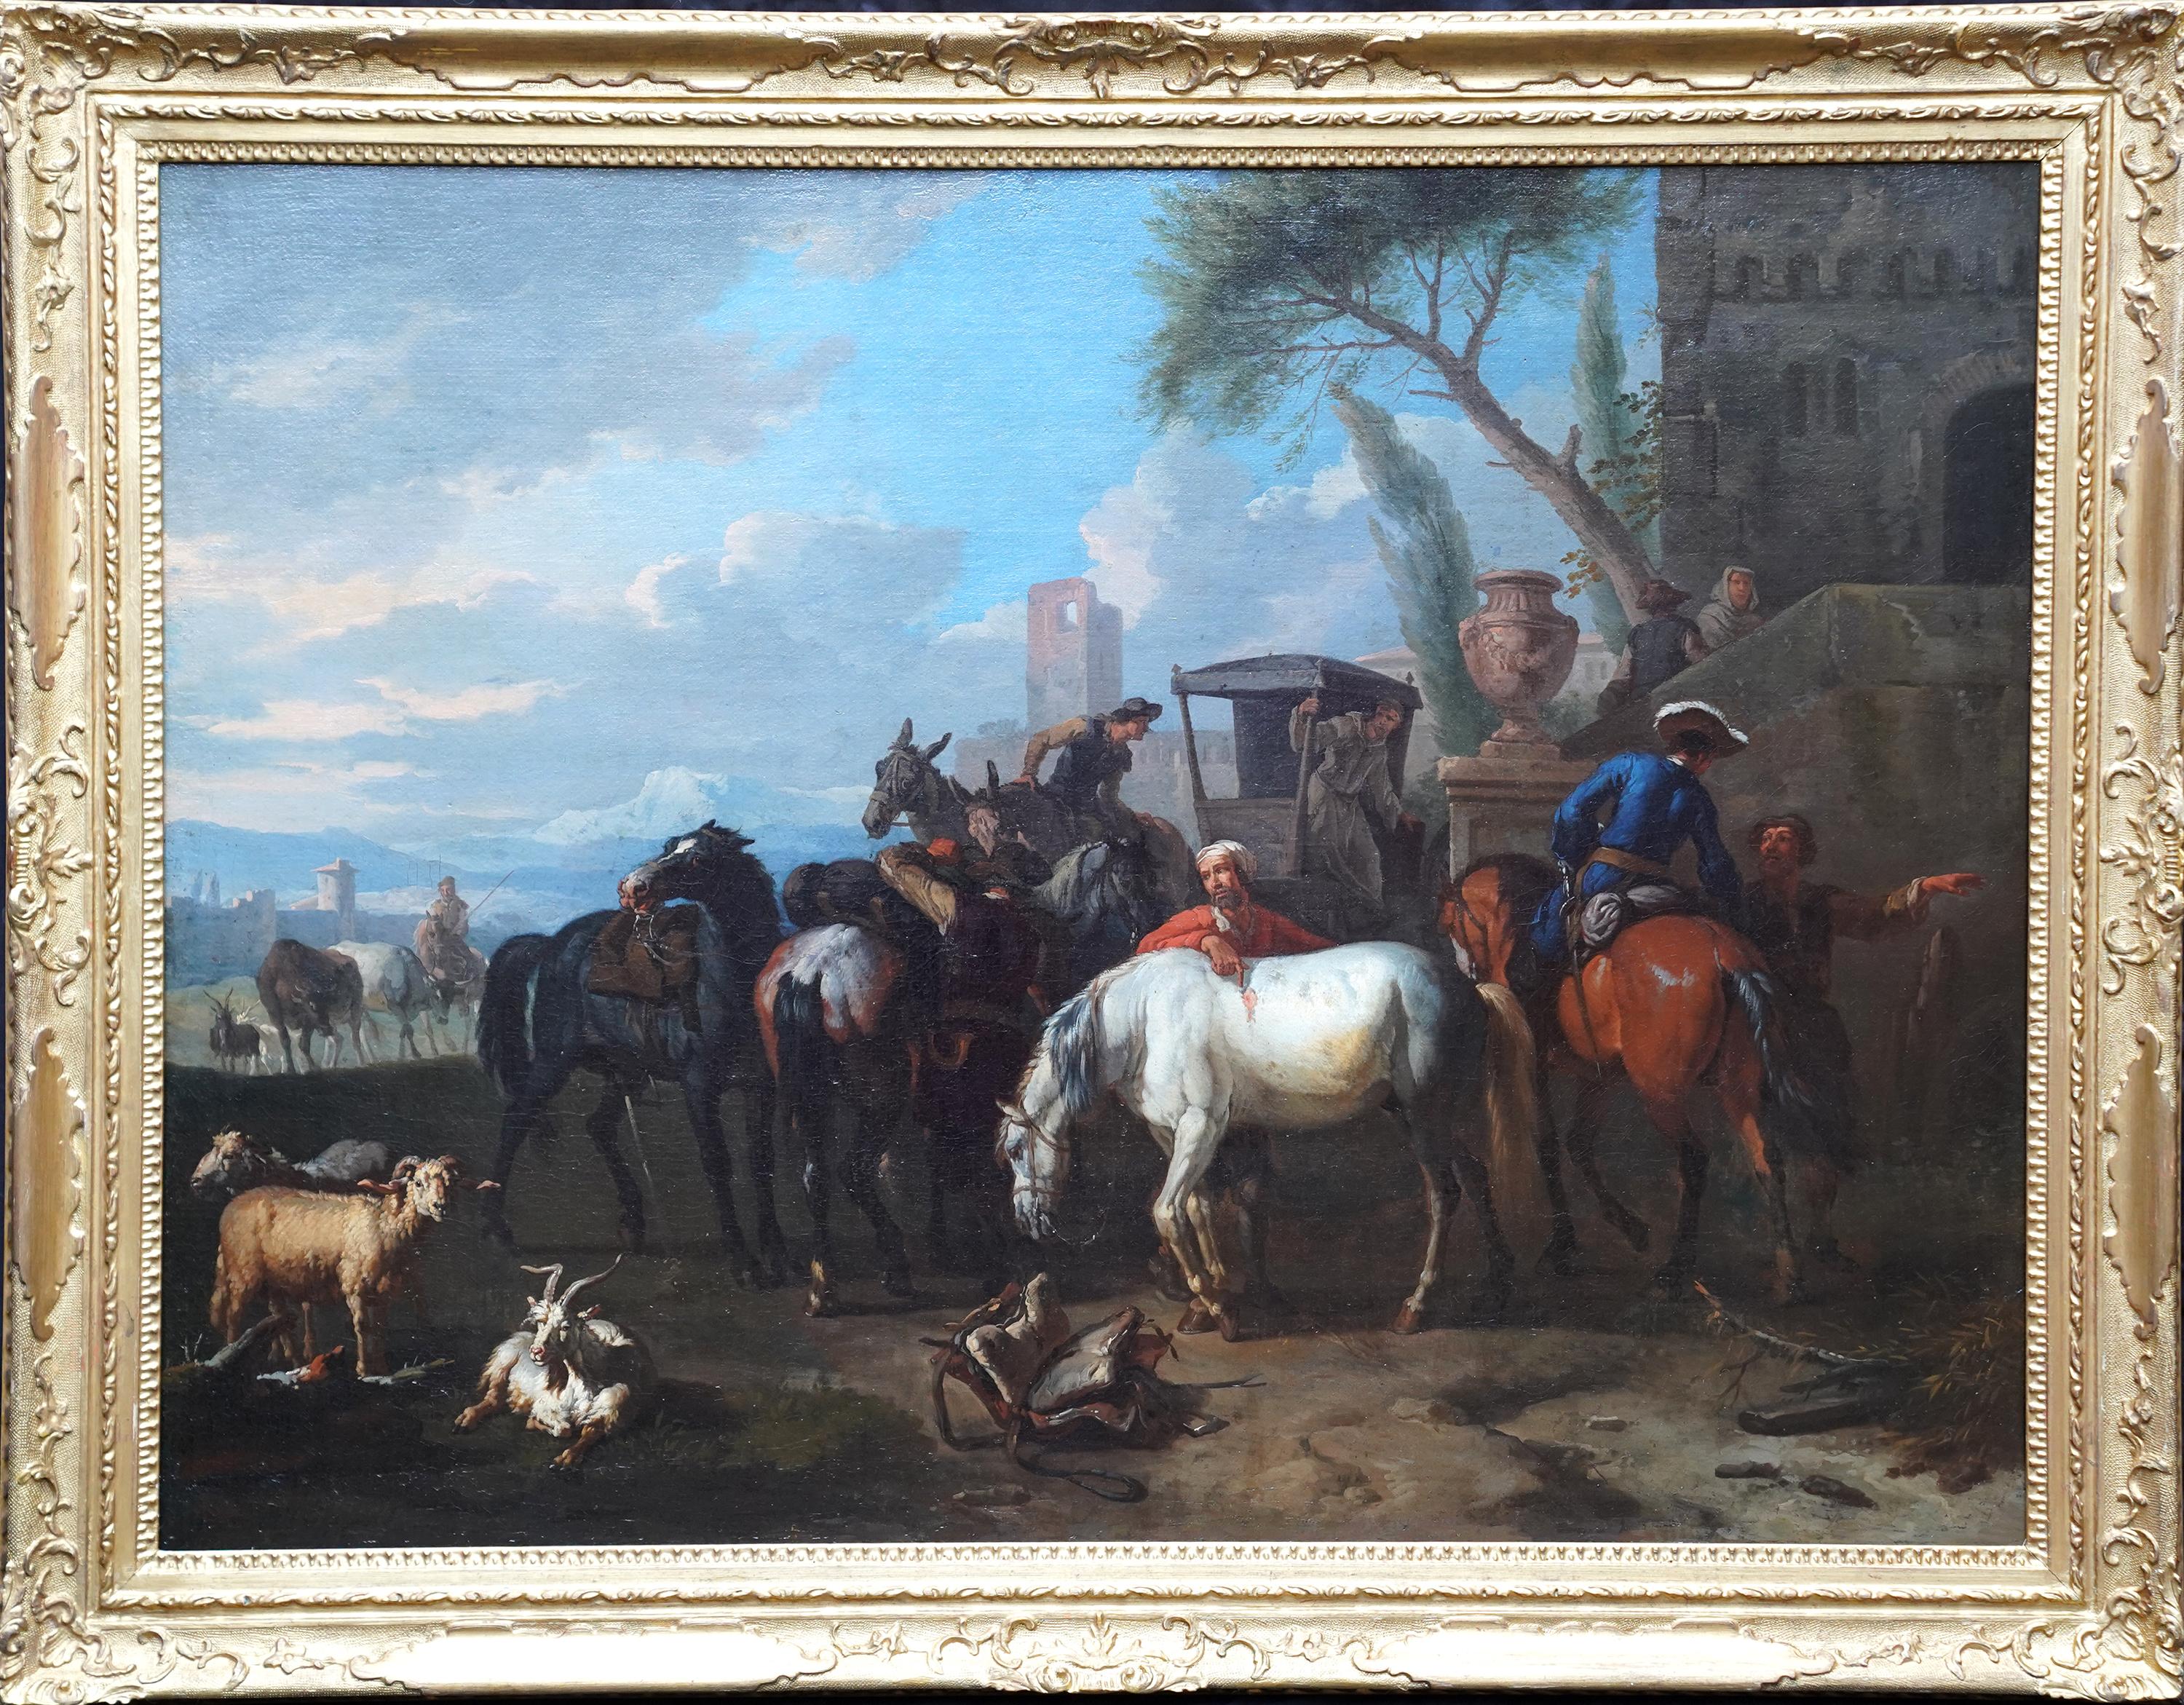 Pieter Bodding Van Laer Landscape Painting - Travellers and Carriage in Landscape Dutch 17th century  Golden Age oil painting